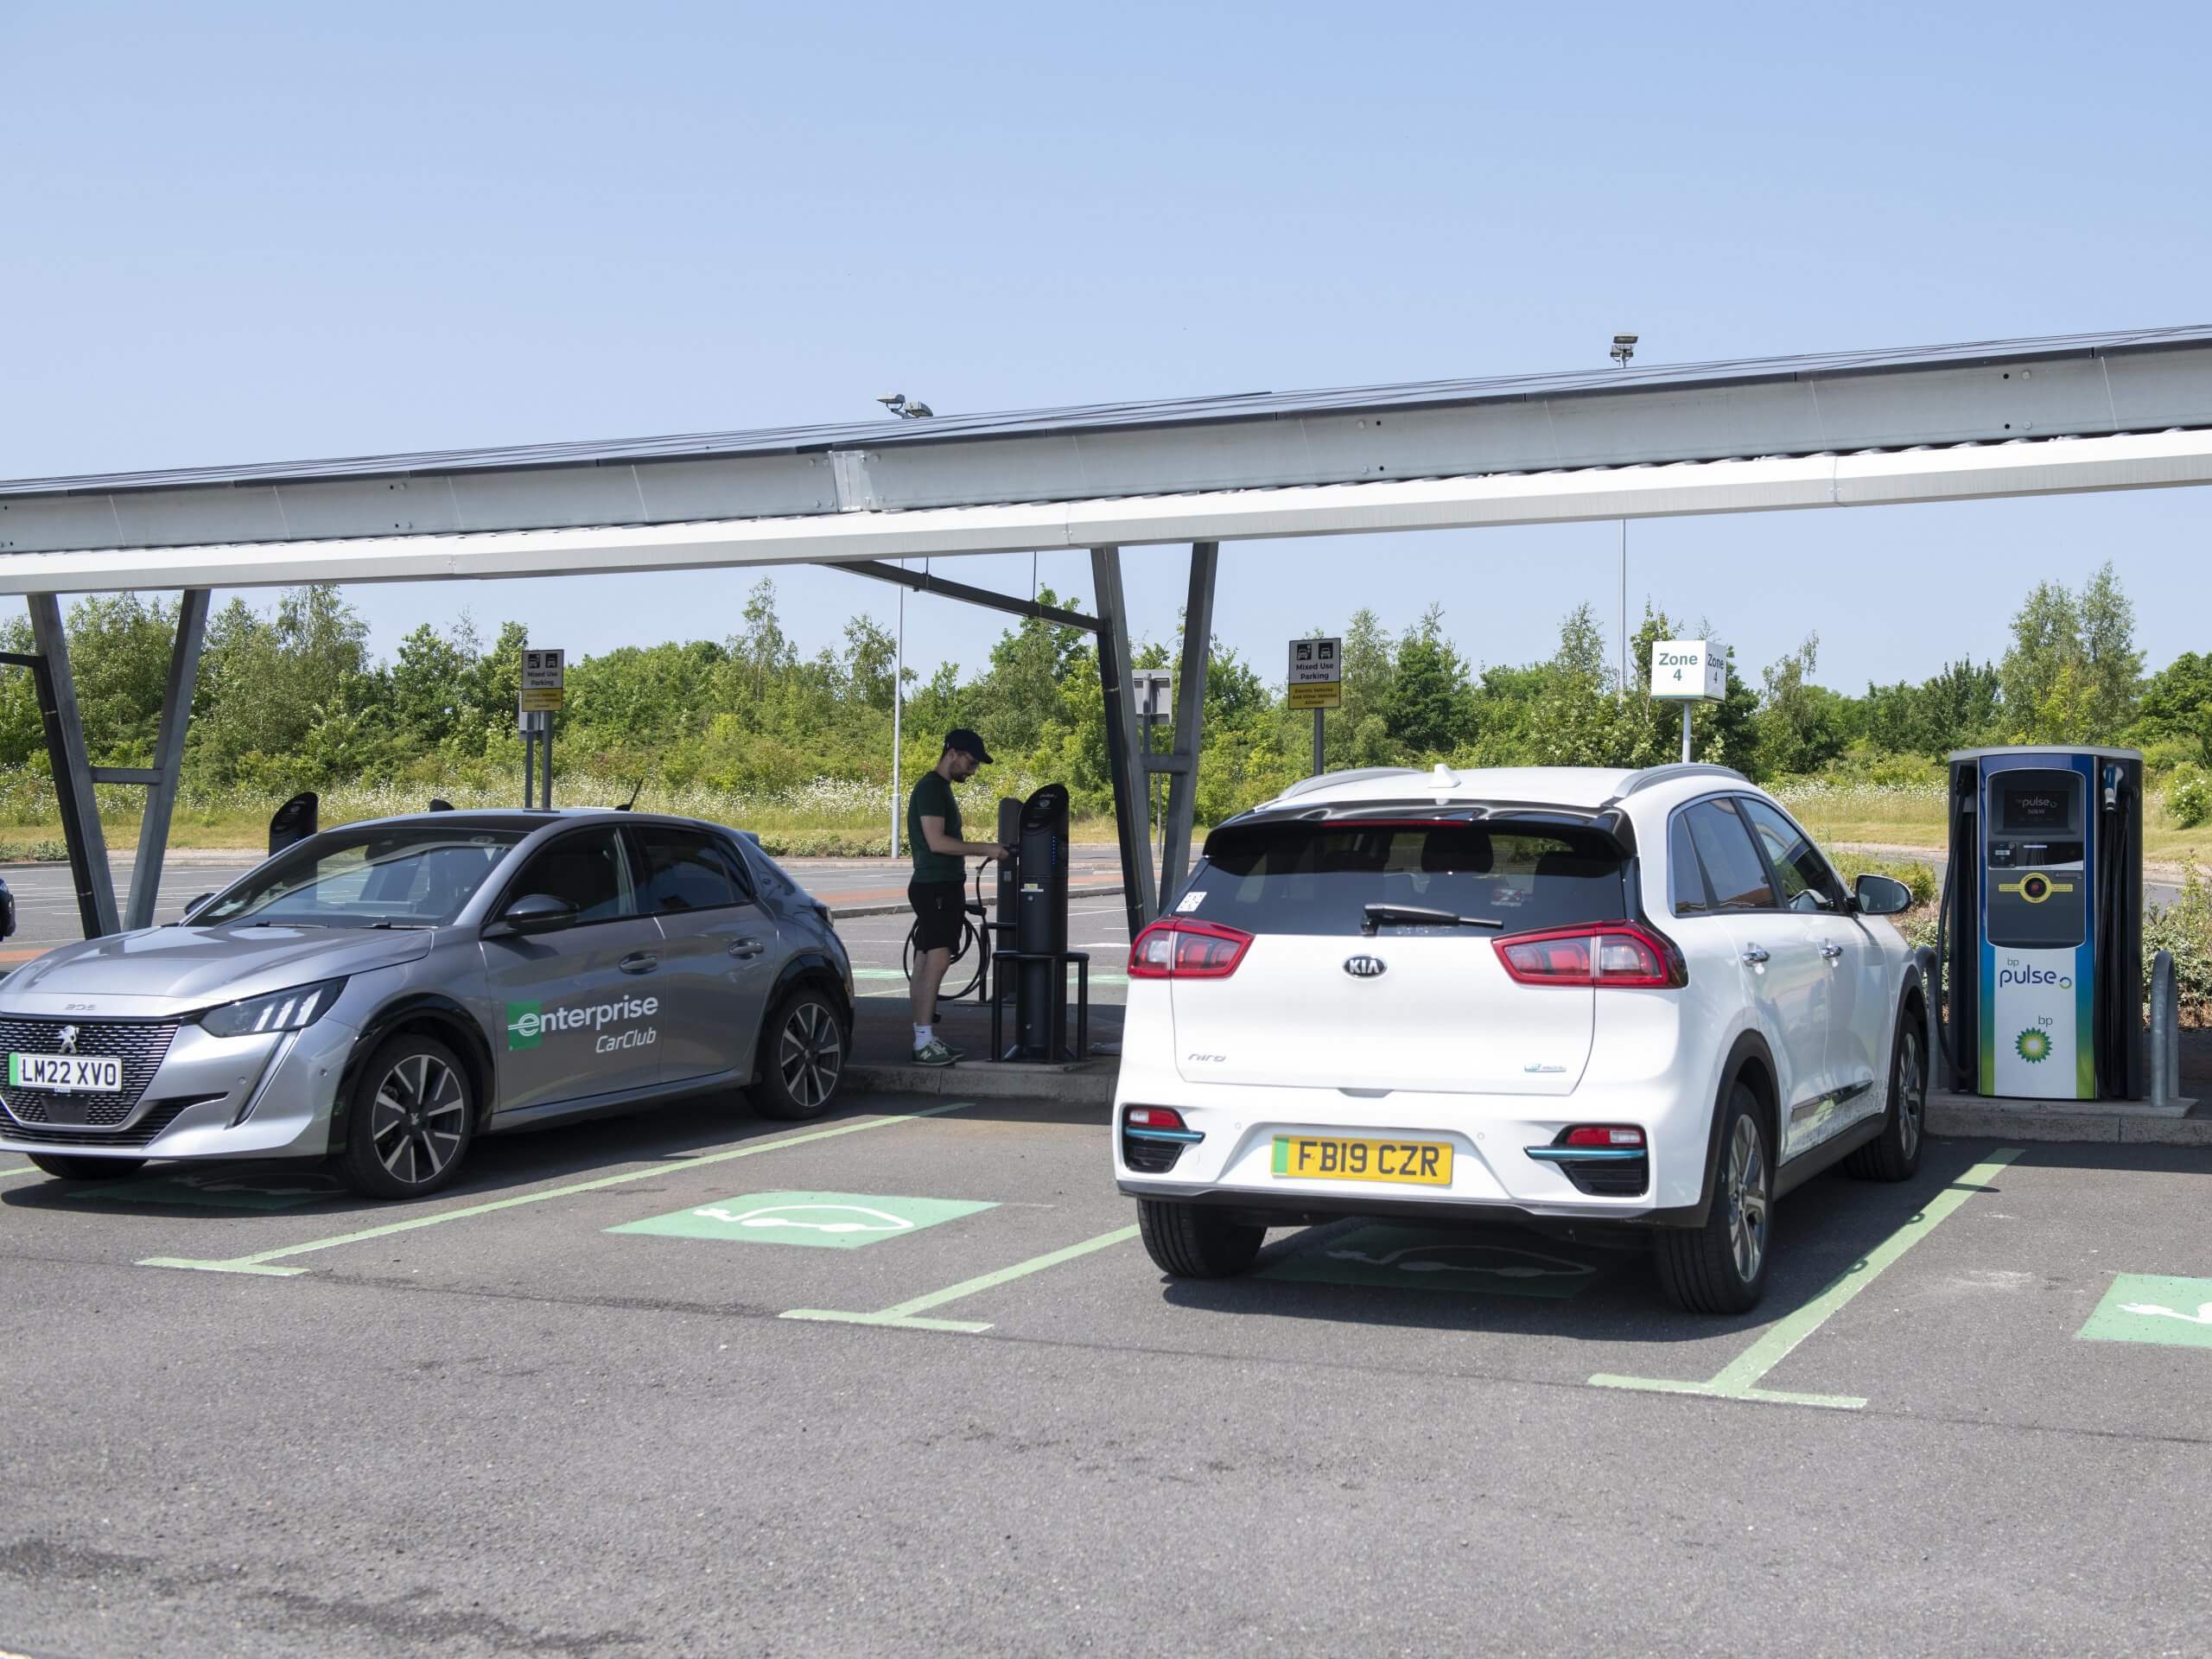 Two Electric Cars charging under a solar panel.